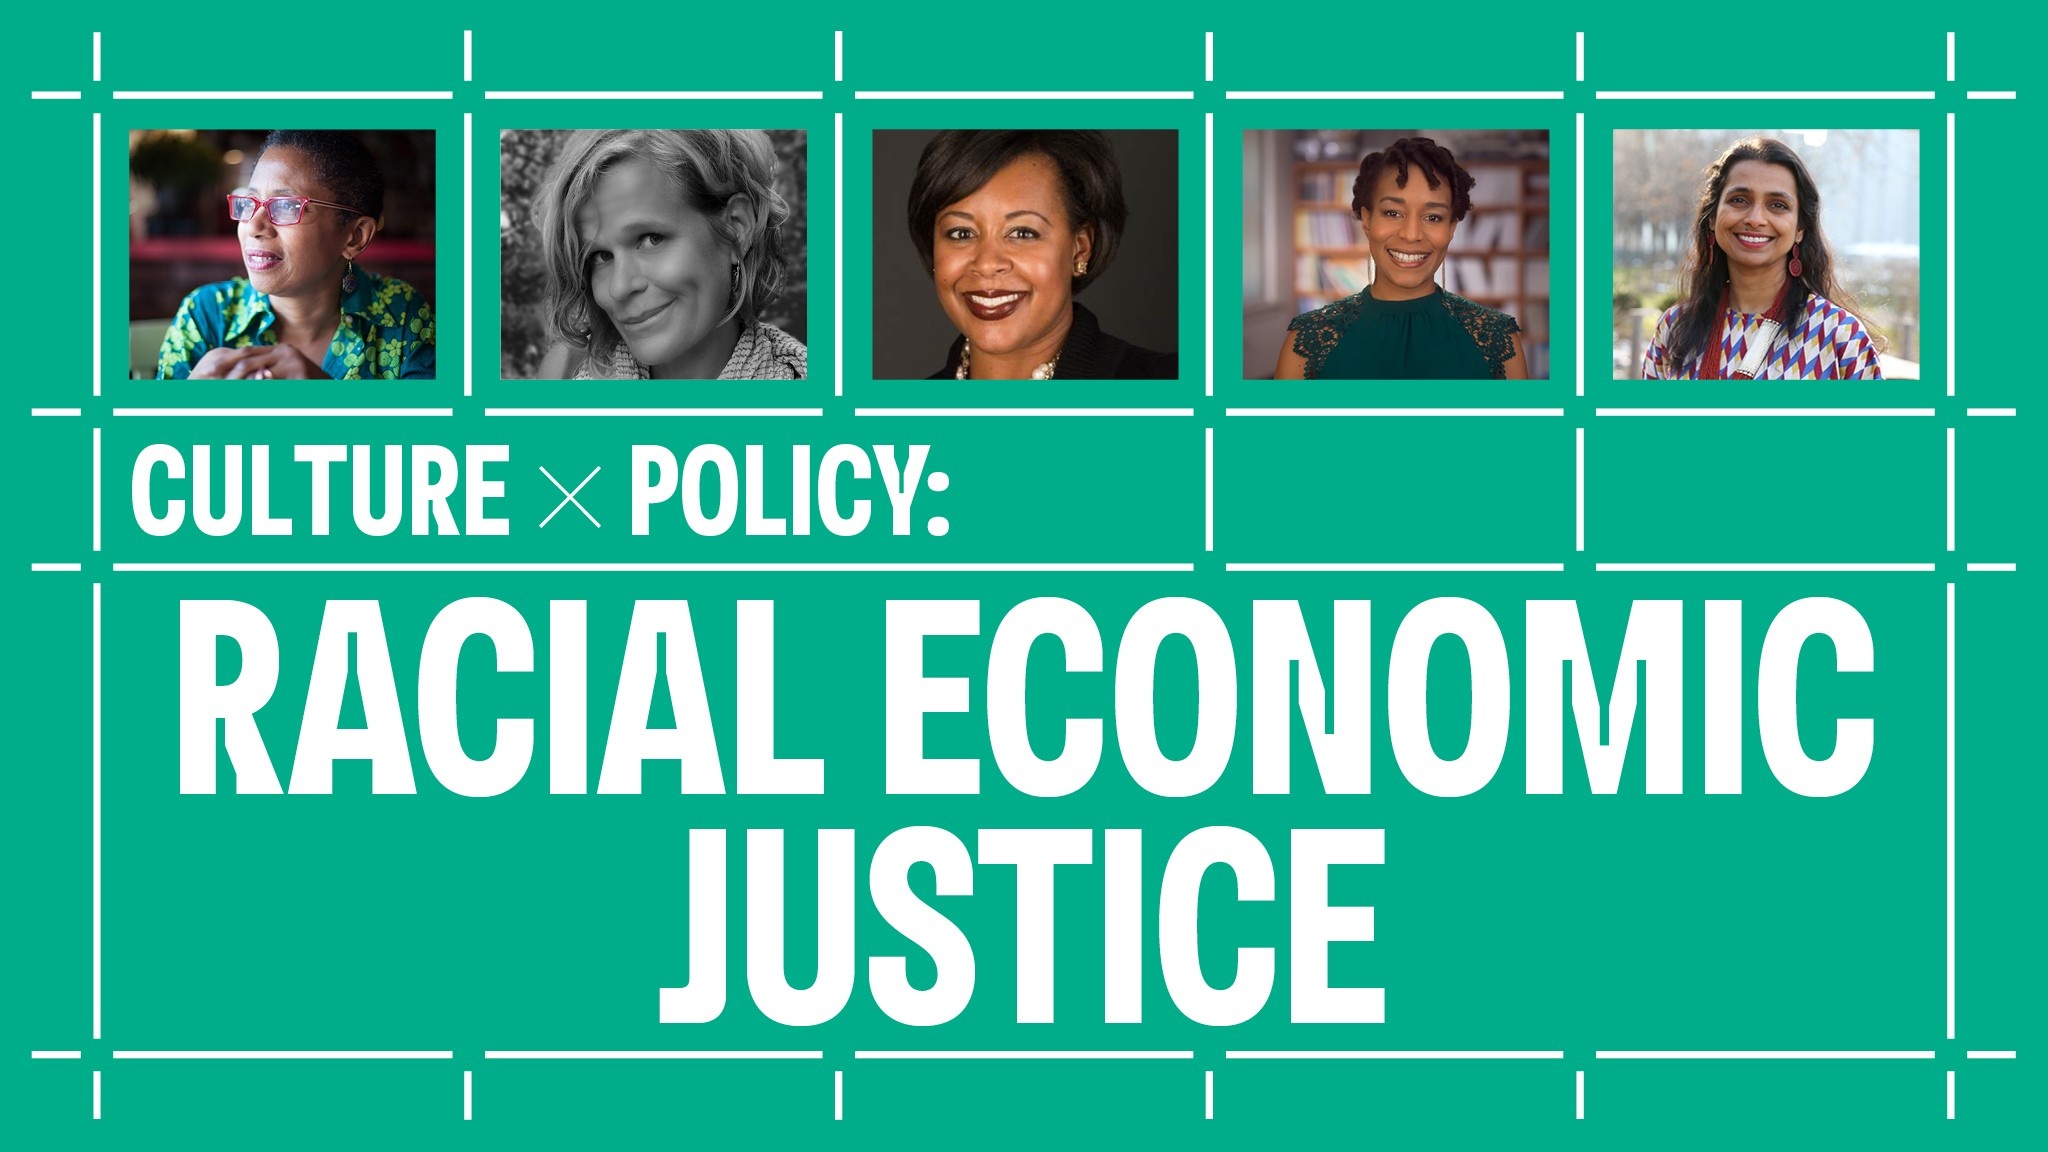 A white grid on a green background that contains five photos of participants in the Culture x Policy: Racial Economic Justice conversation, from left to right: Walis Johnson, Betsy MacLean, Kriston Alford McIntosh, Barika X. Williams, and moderator Prerana Reddy.